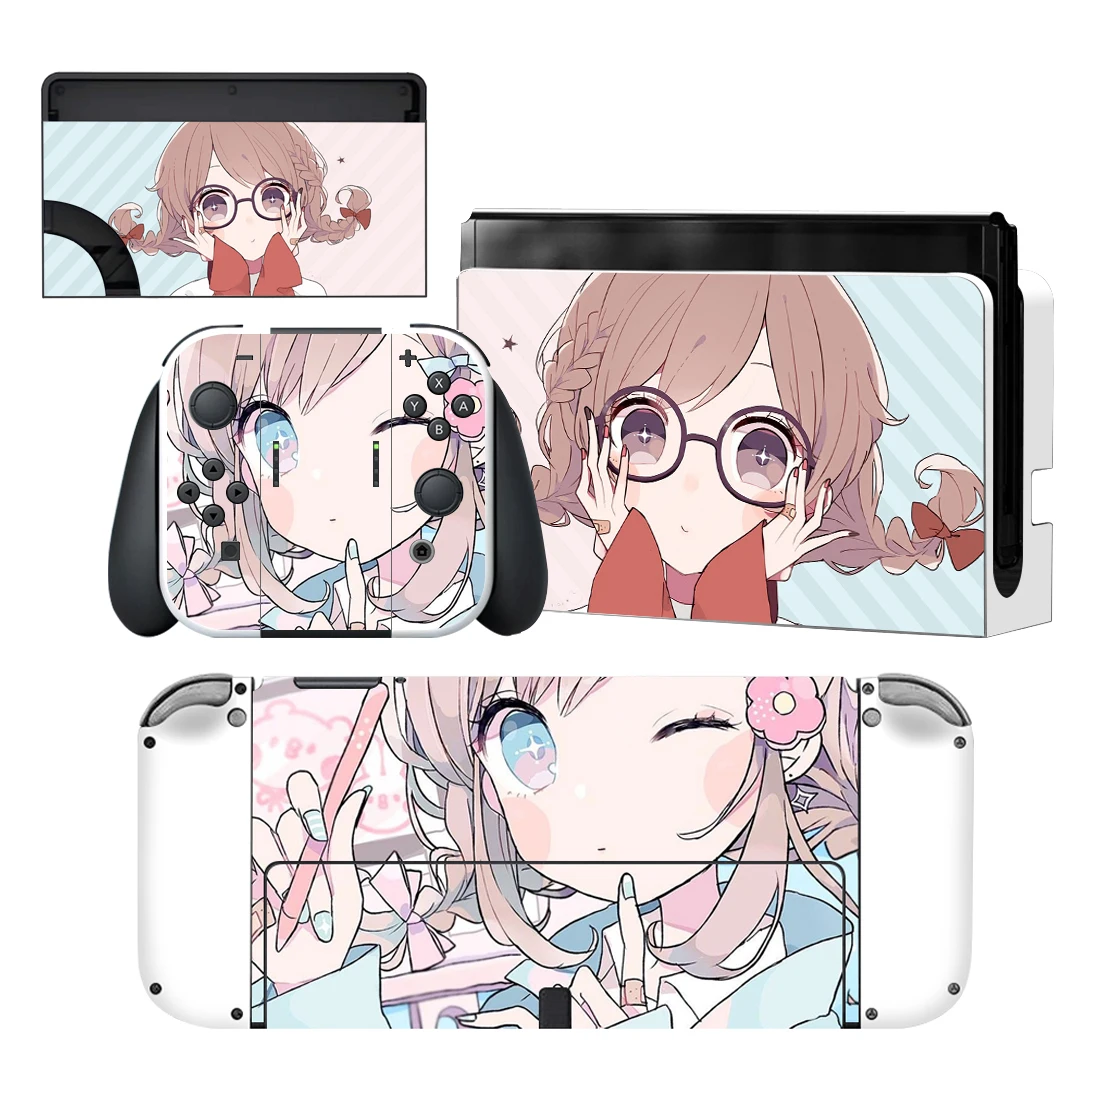 

Anime Cute Girl Nintendoswitch Skin Cover Sticker Decal for Nintendo Switch OLED NS Console Joy-con Controller Dock Skin Vinyl